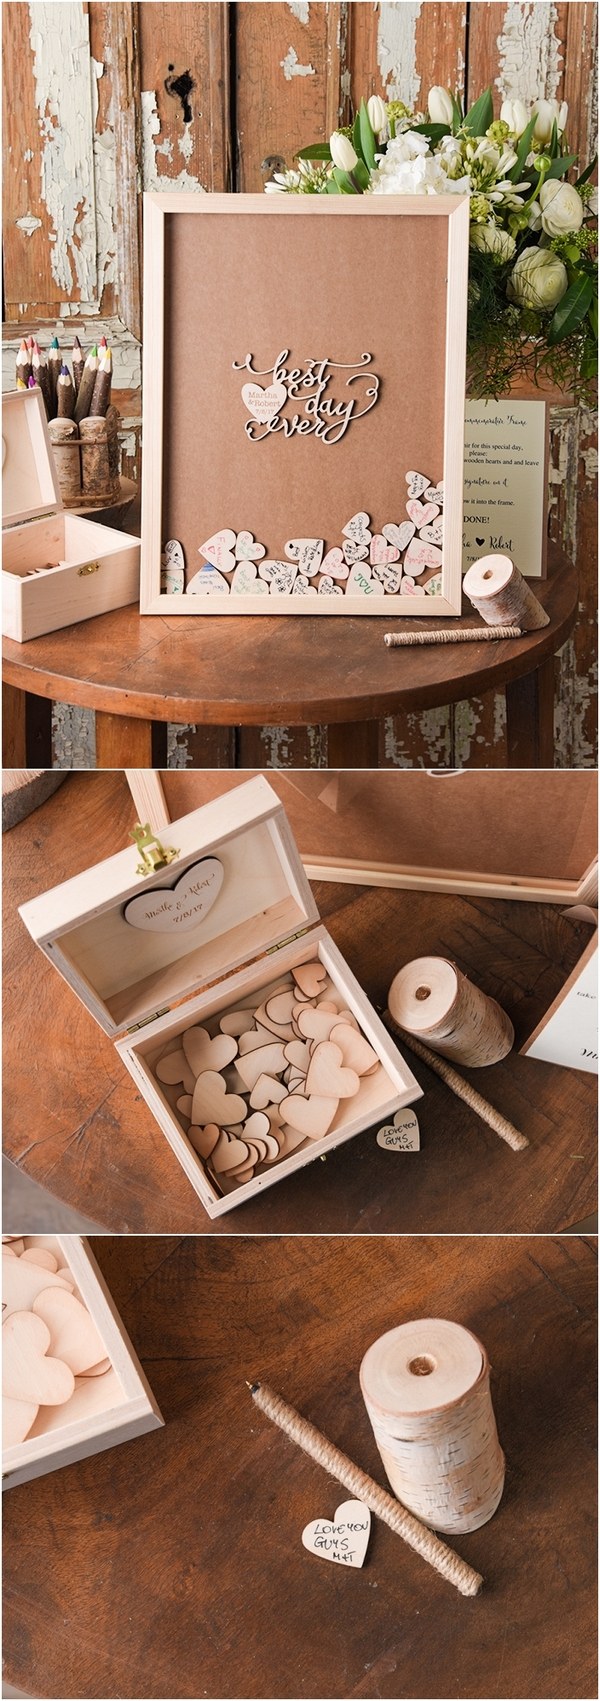 Rustic Laser Cut Wood Wedding Guest Book- Best day ever